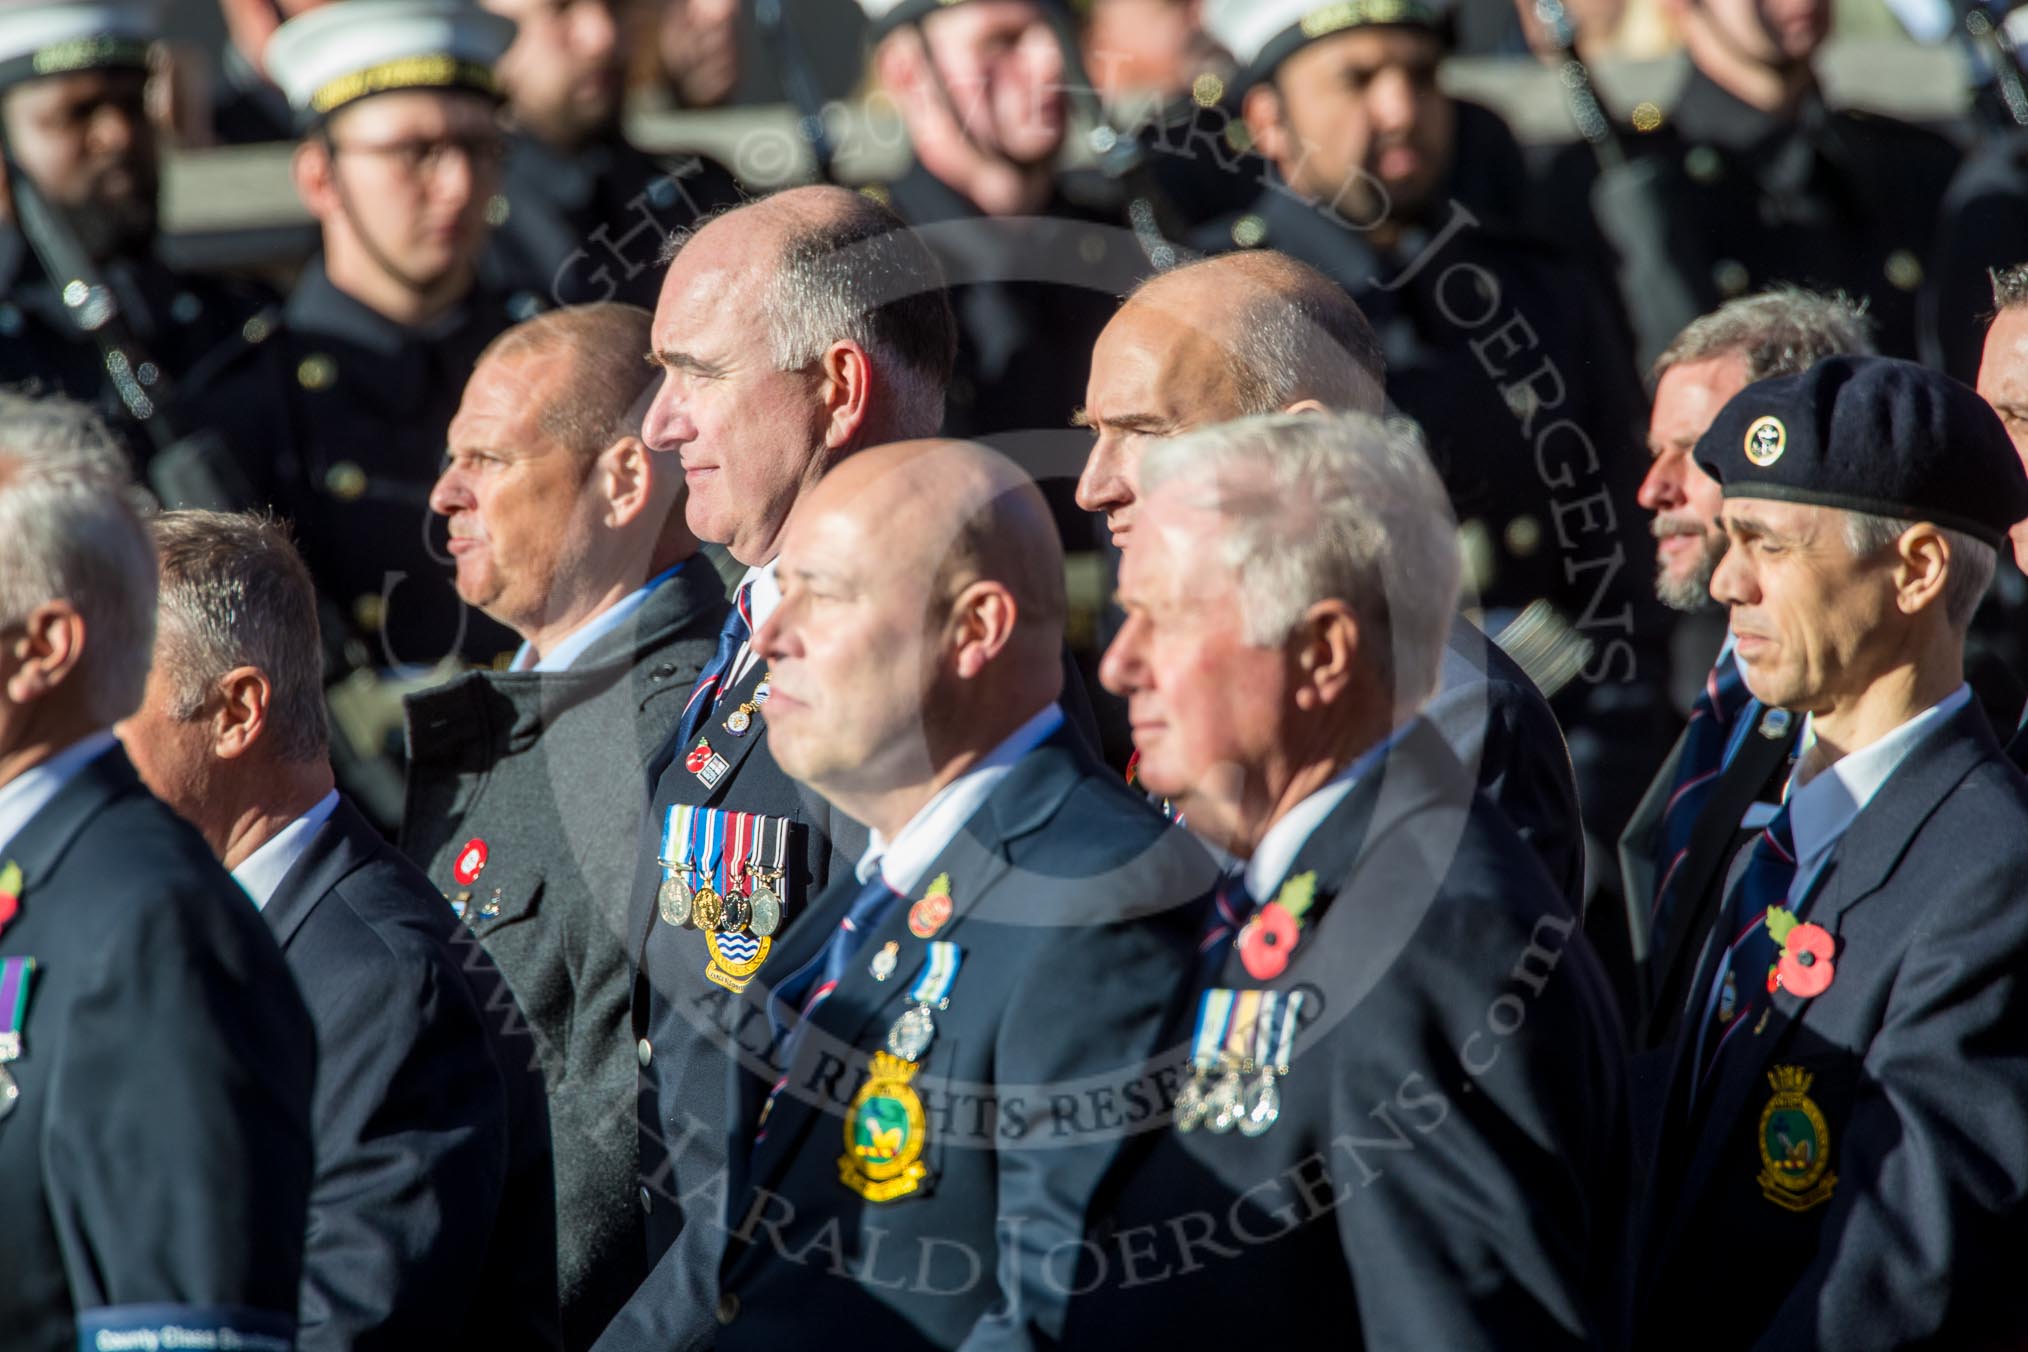 County Class Destroyer (Group E43, 30 members) during the Royal British Legion March Past on Remembrance Sunday at the Cenotaph, Whitehall, Westminster, London, 11 November 2018, 11:46.